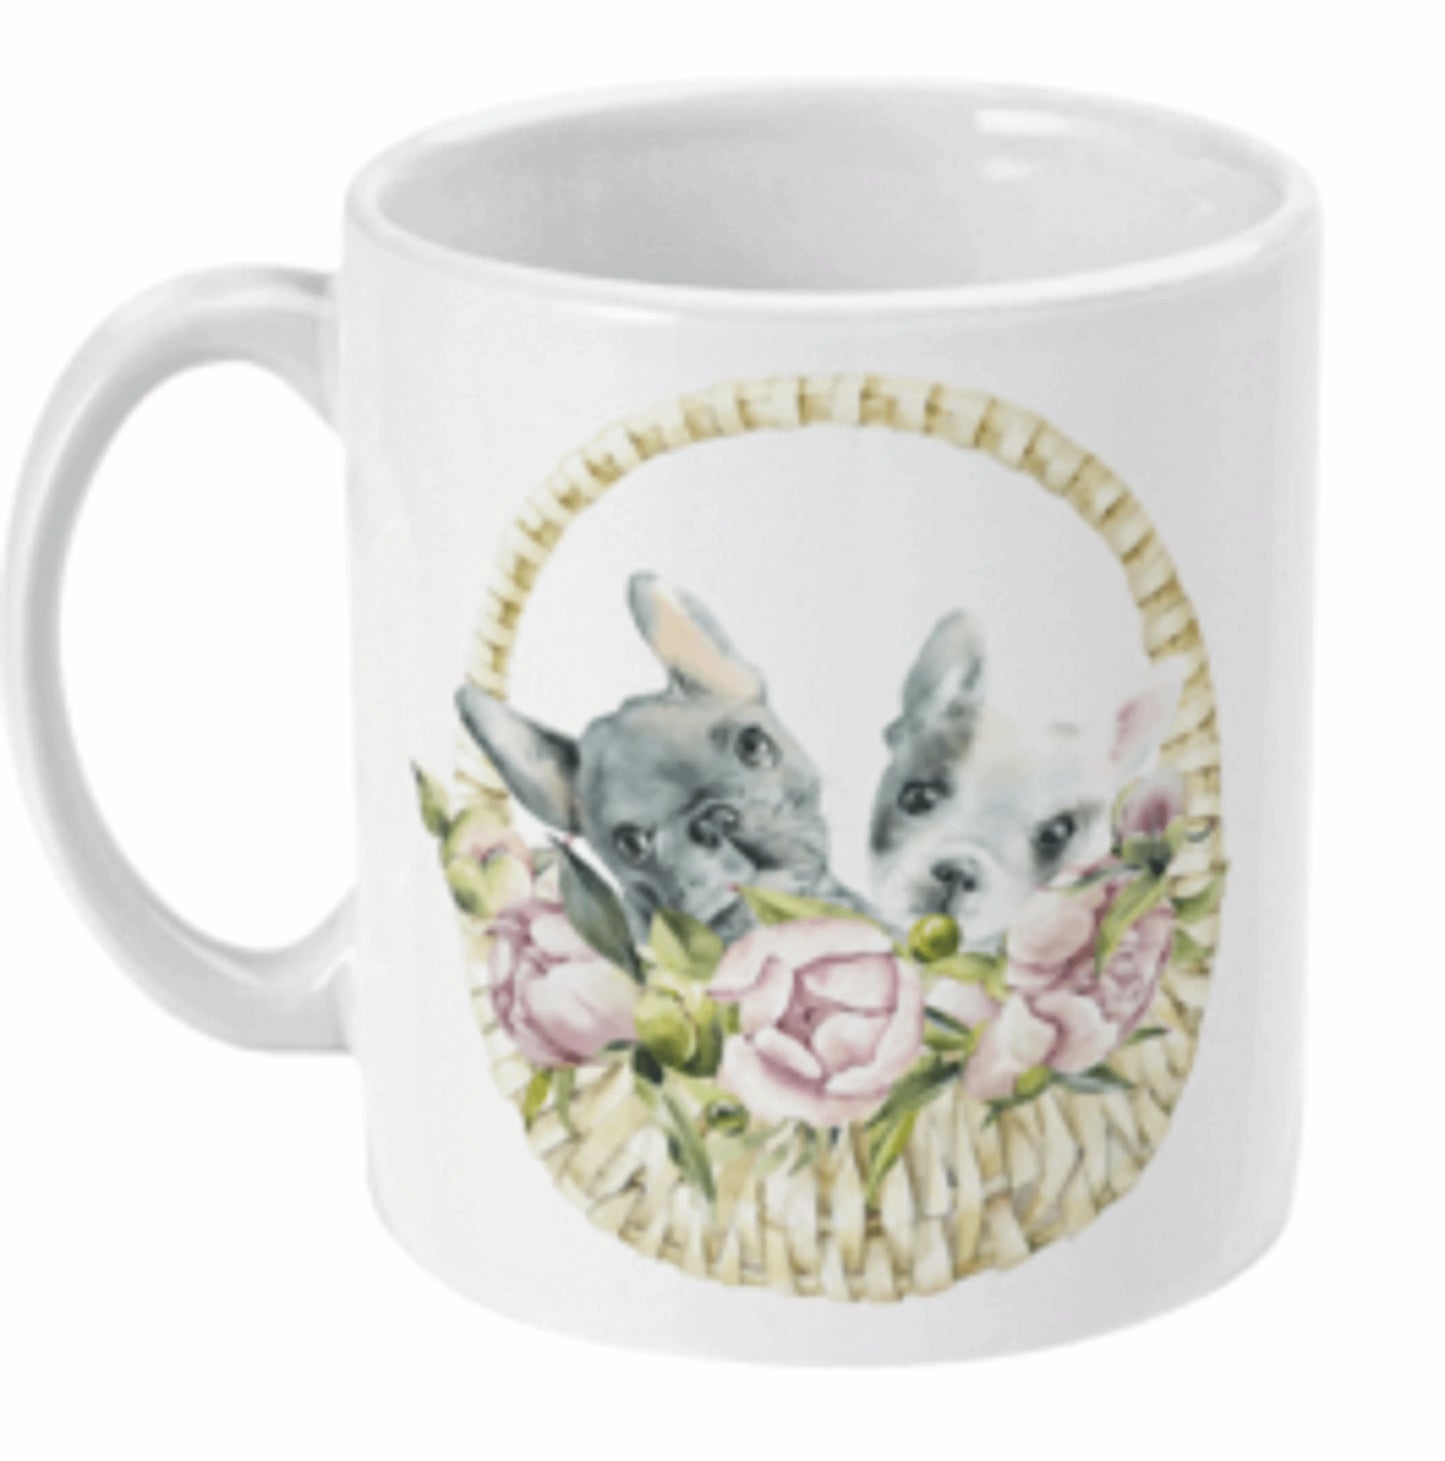  2 French Bulldogs in Flower Basket Coffee Mug by Free Spirit Accessories sold by Free Spirit Accessories